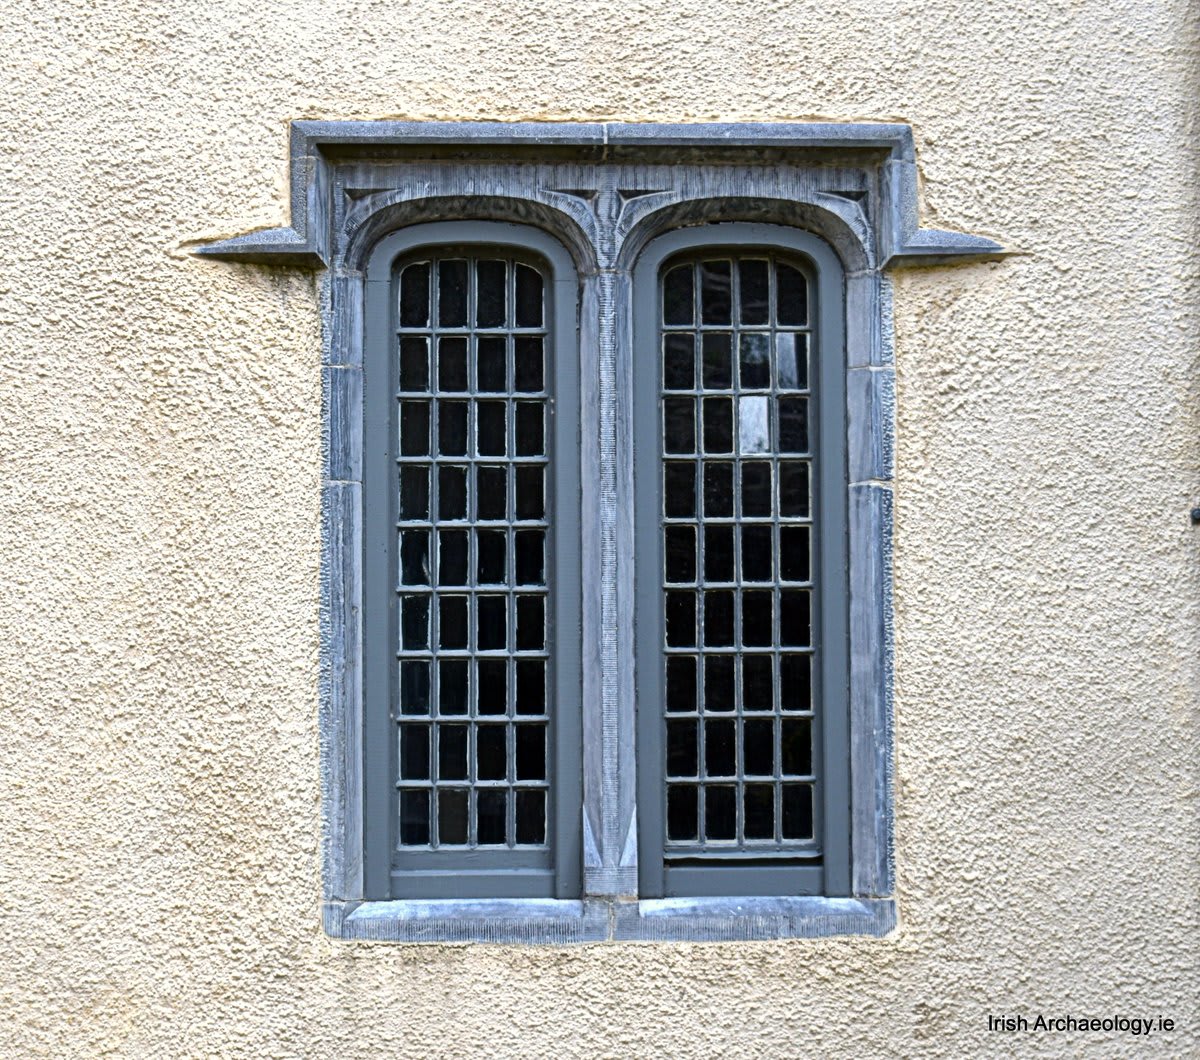 Some Tudor period windows at Cahir castle, Co. Tipperary